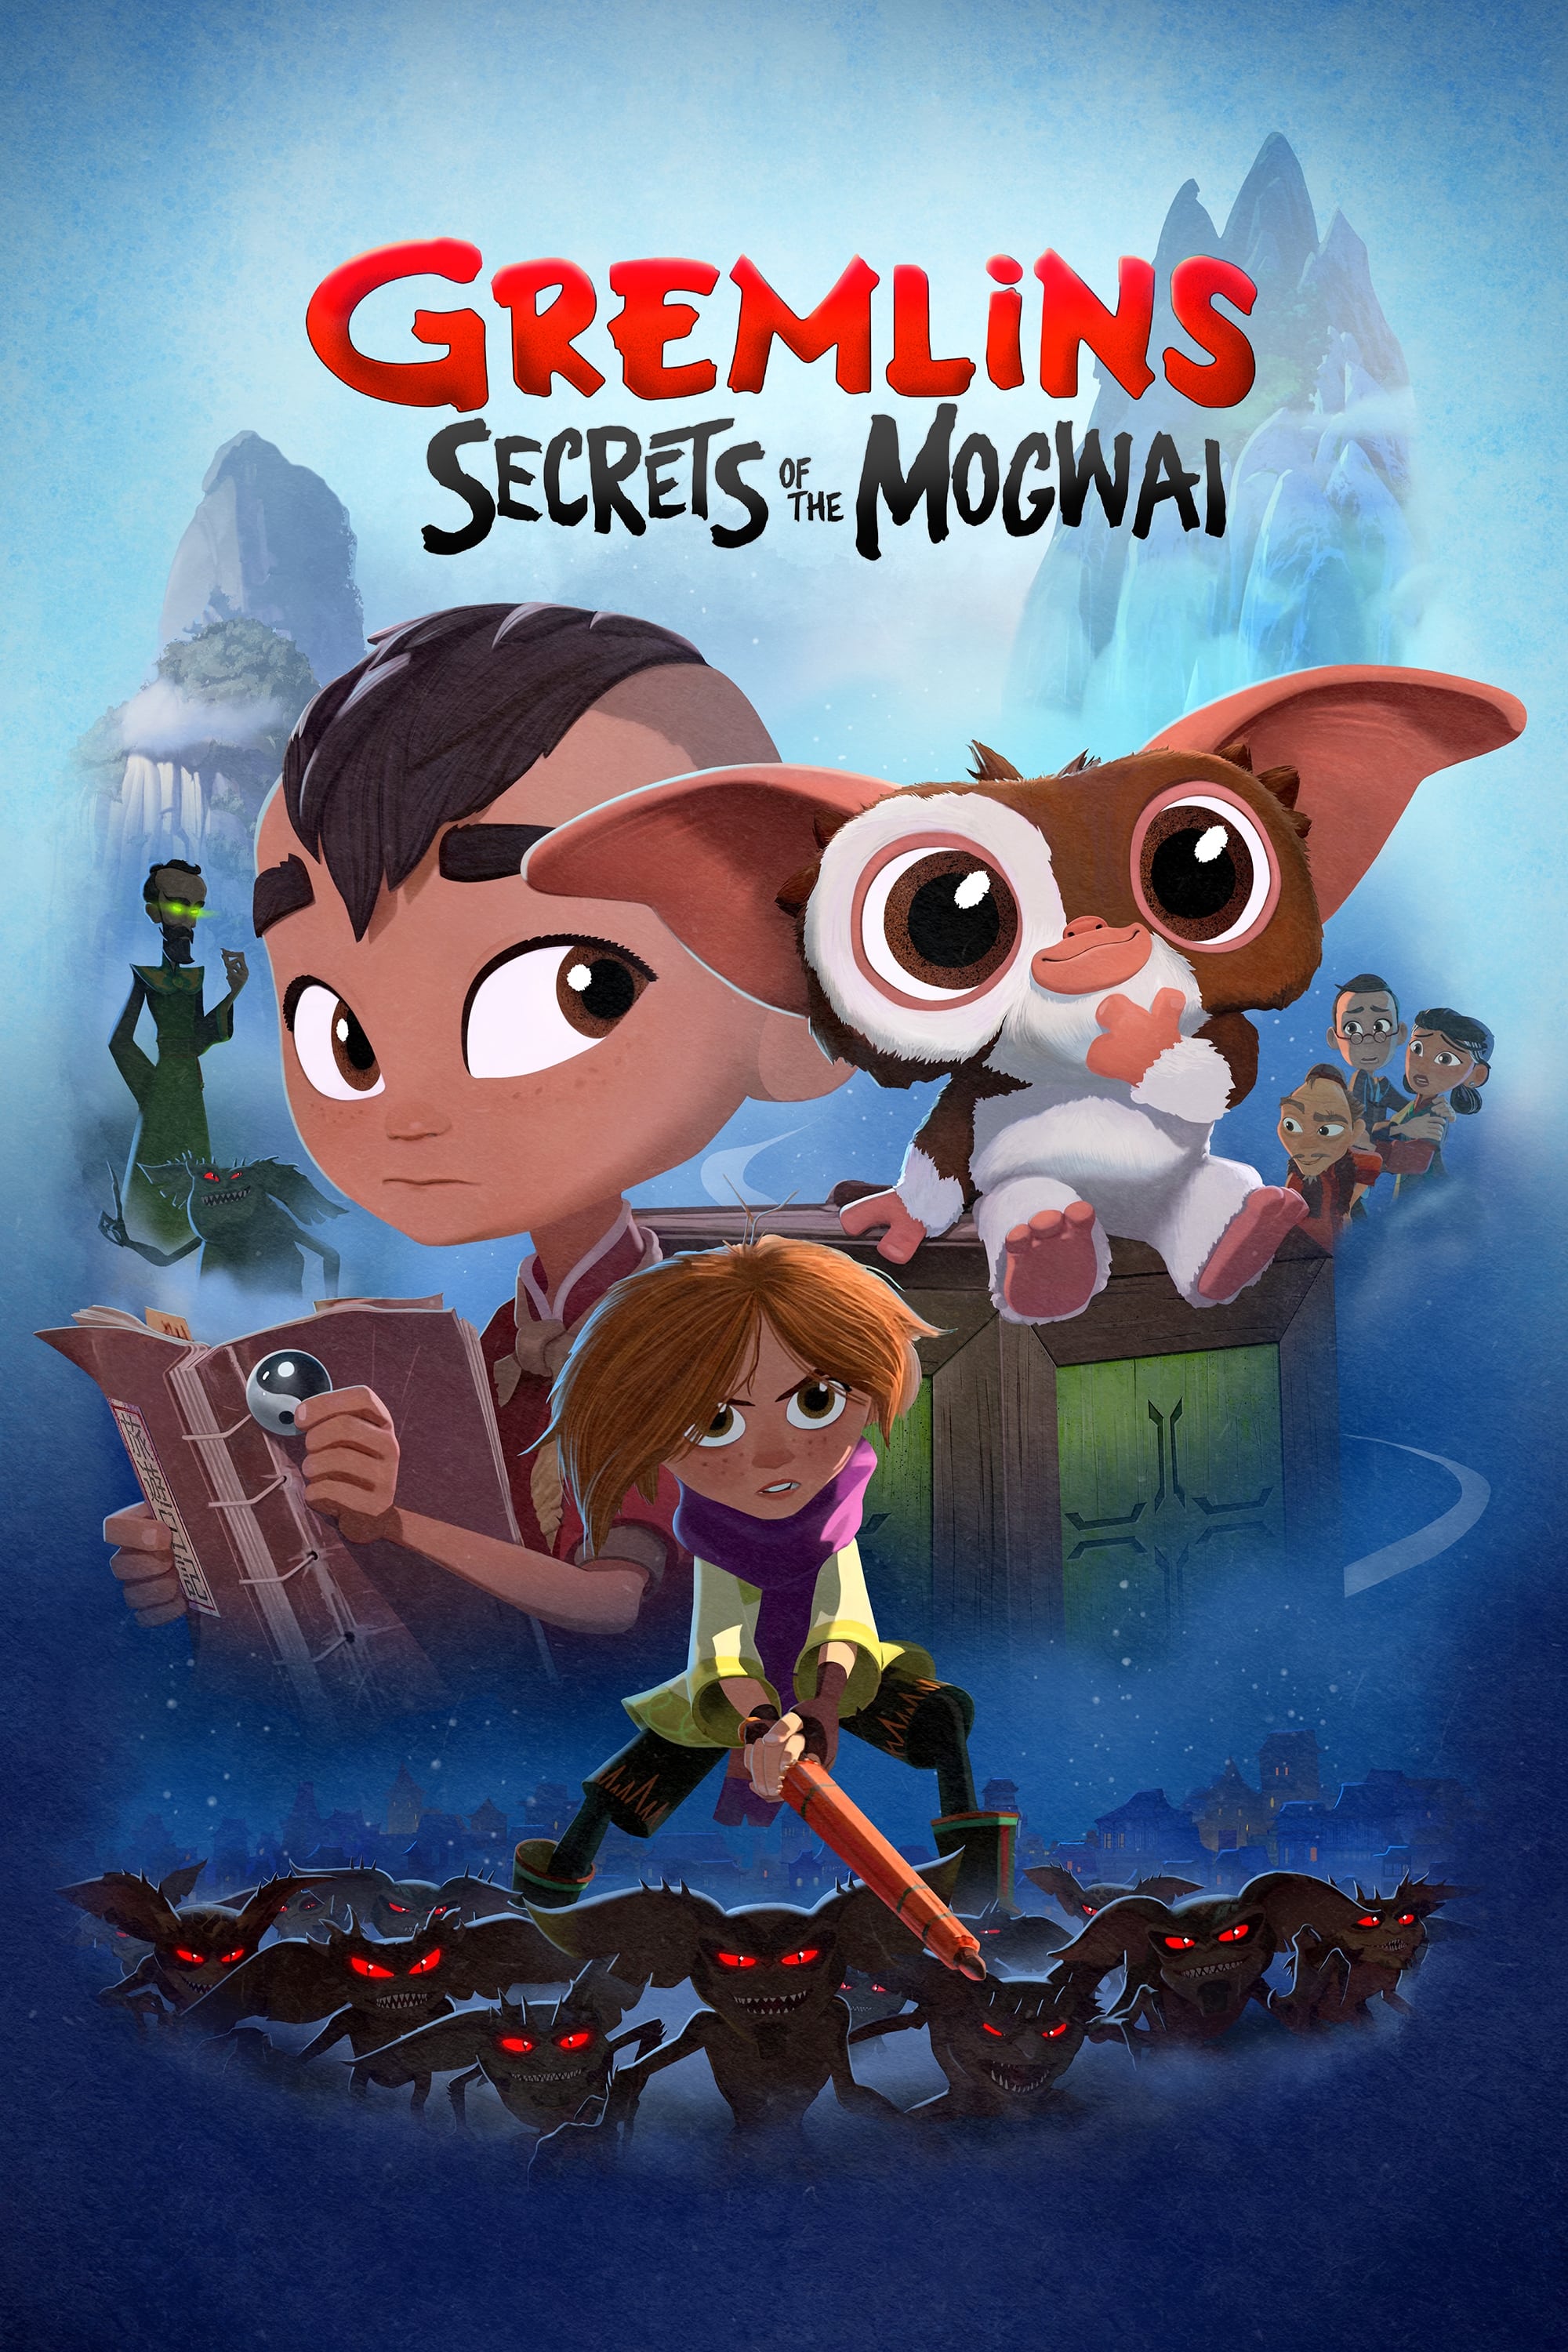 Gremlins: Secrets of the Mogwai TV Shows About Based On Movie